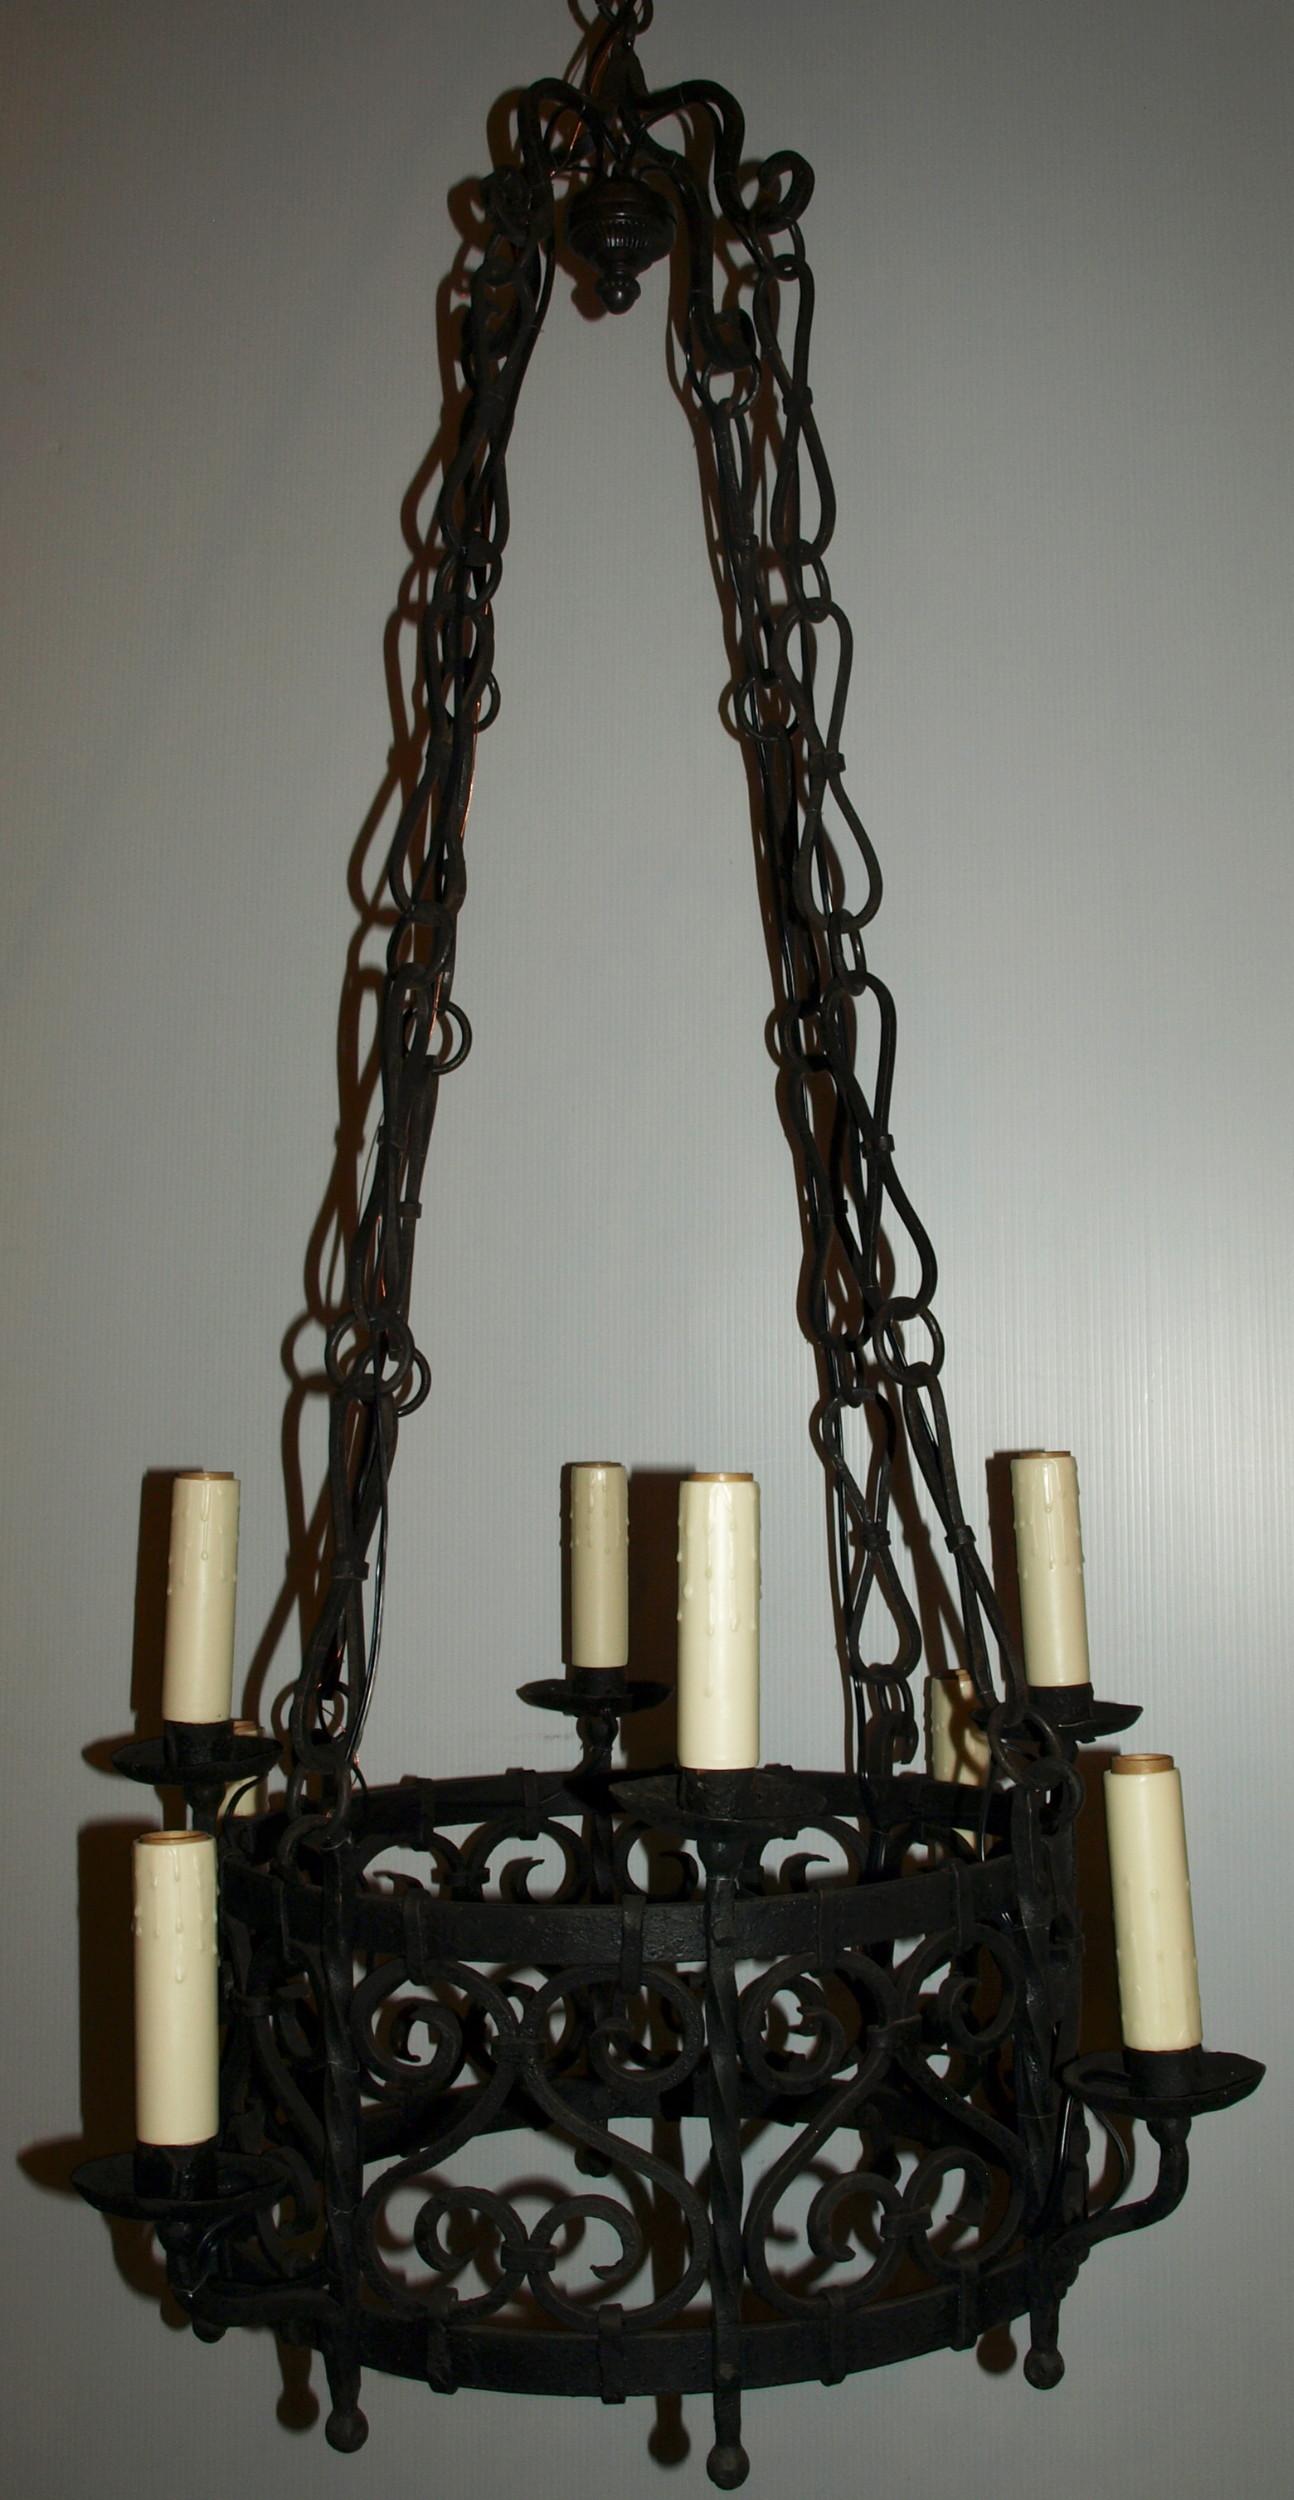 A very fine French Provincial chandelier. Wonderful ironwork, please notice that most pieces are not soldered but riveted together, France, circa 1900
Dimensions: Height 48